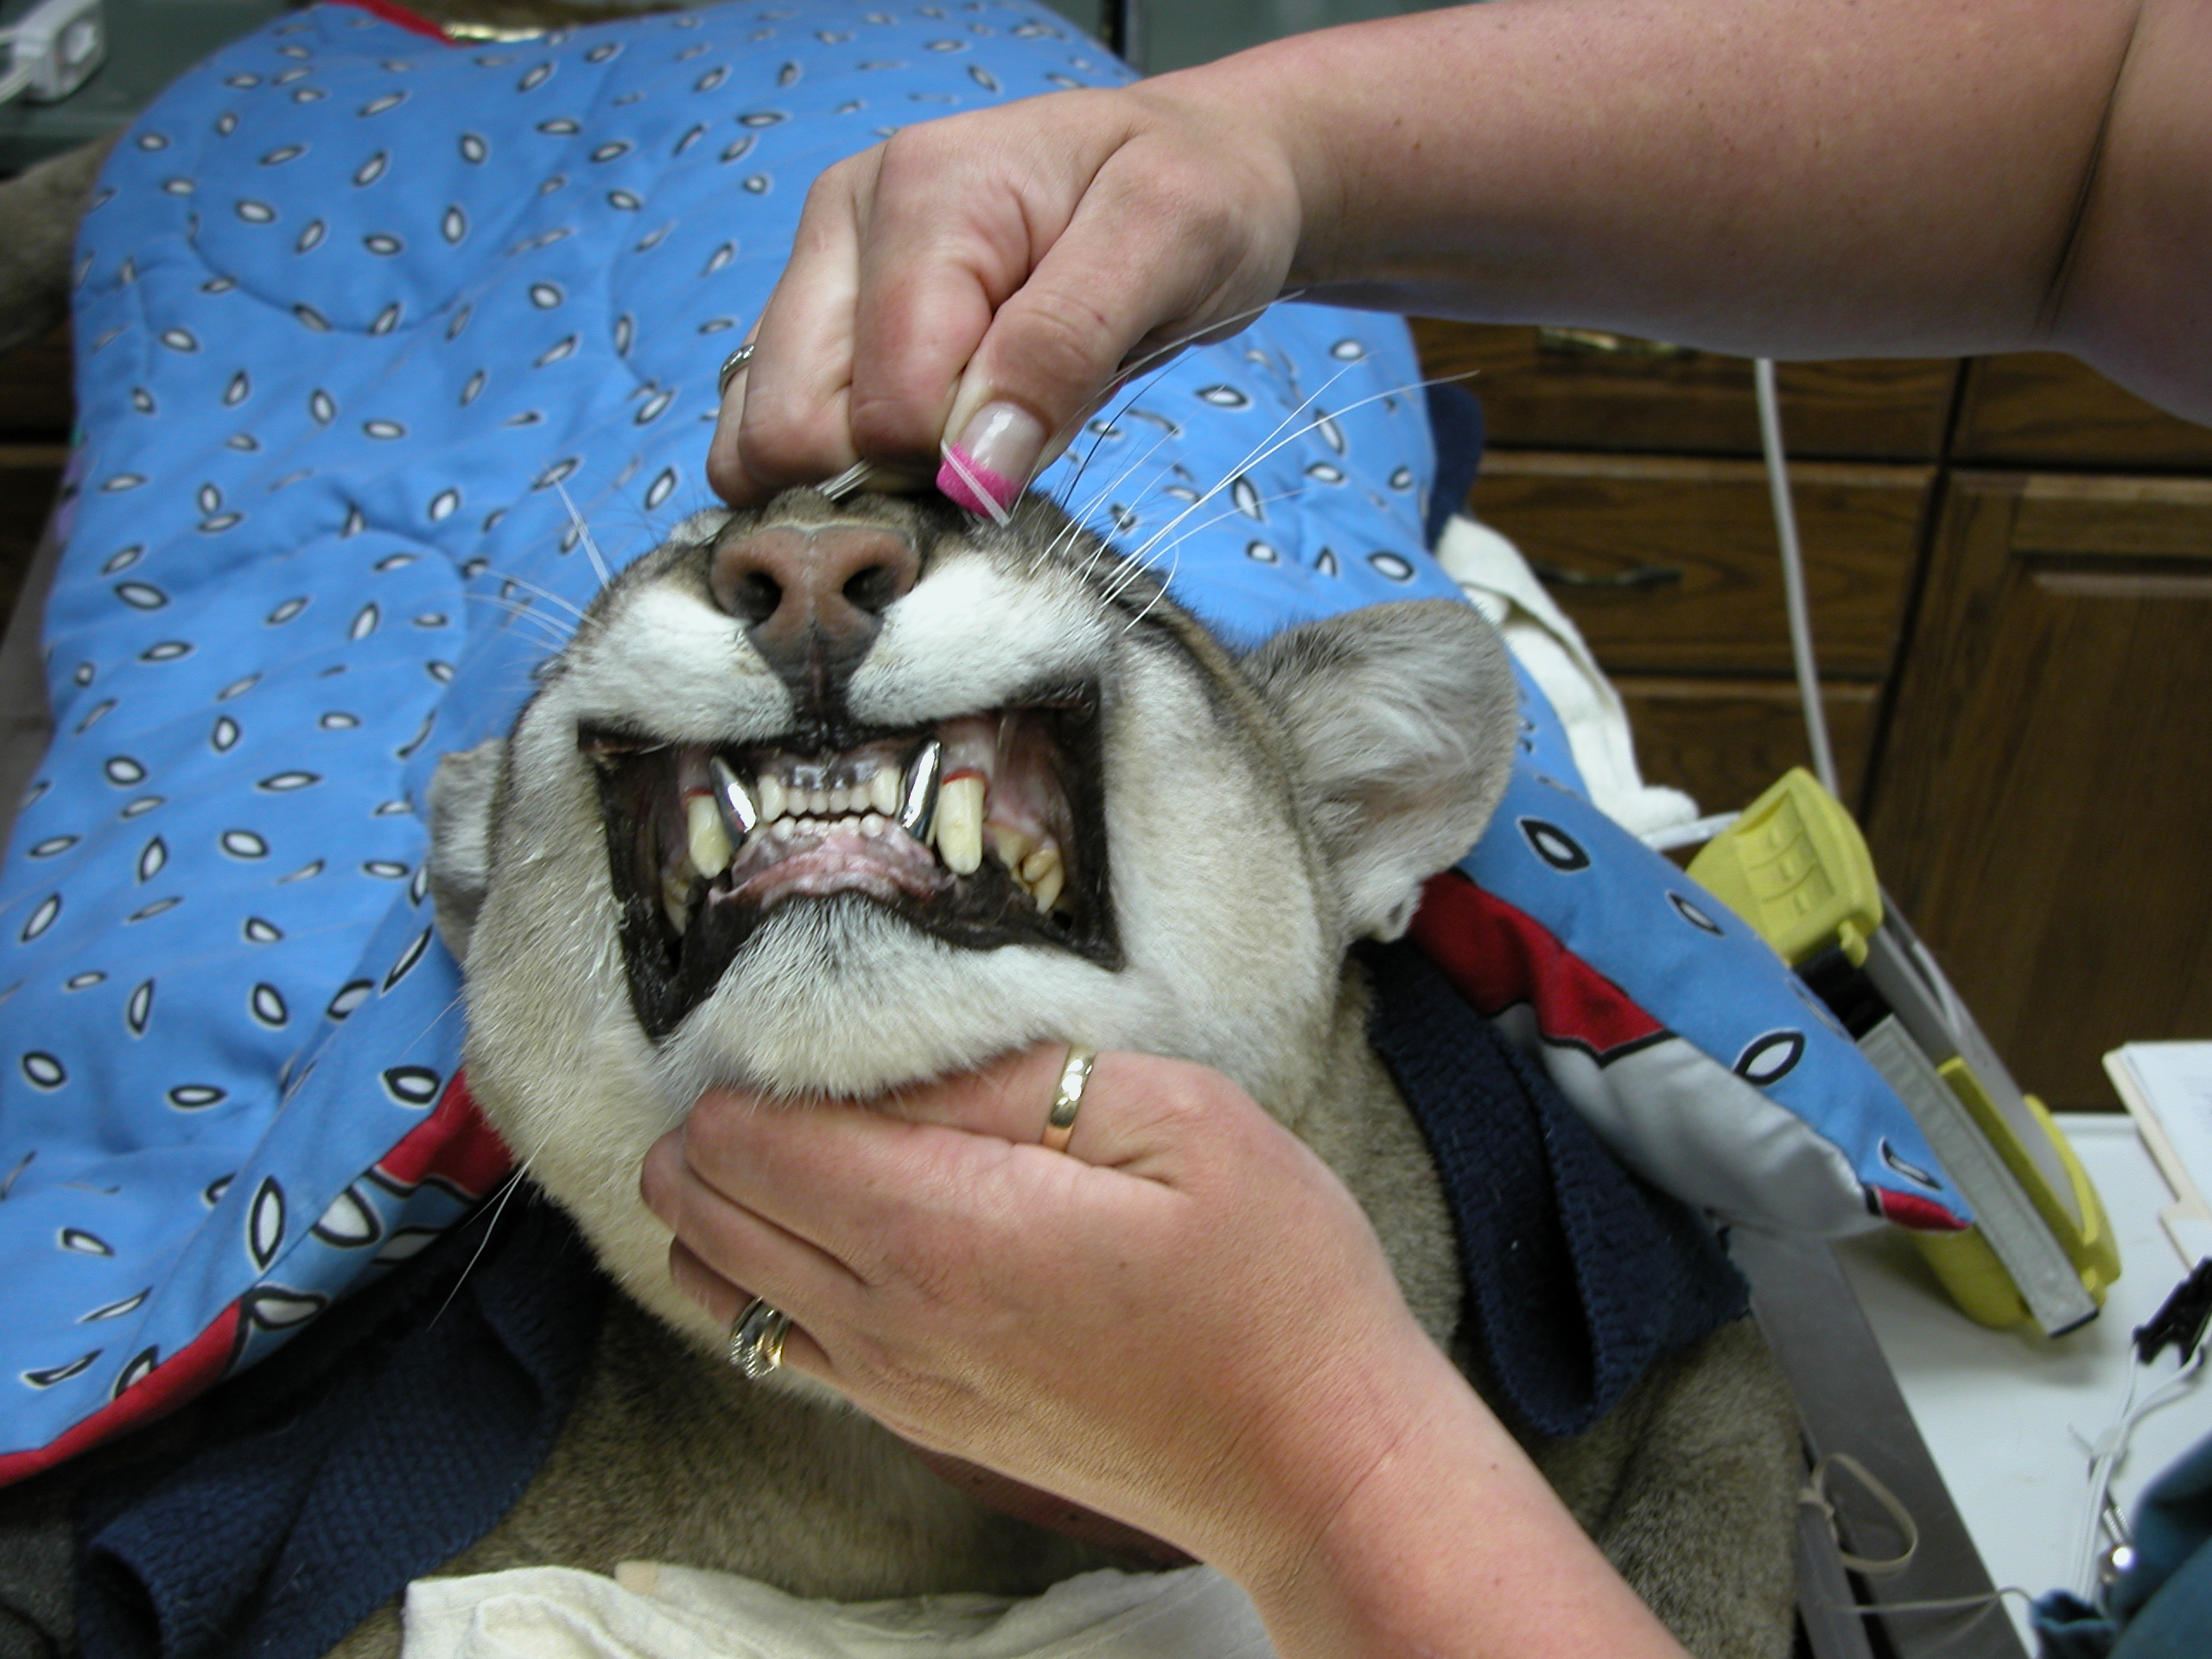 A mountain lion sporting new teeth. Courtesy of Brook Niemiec